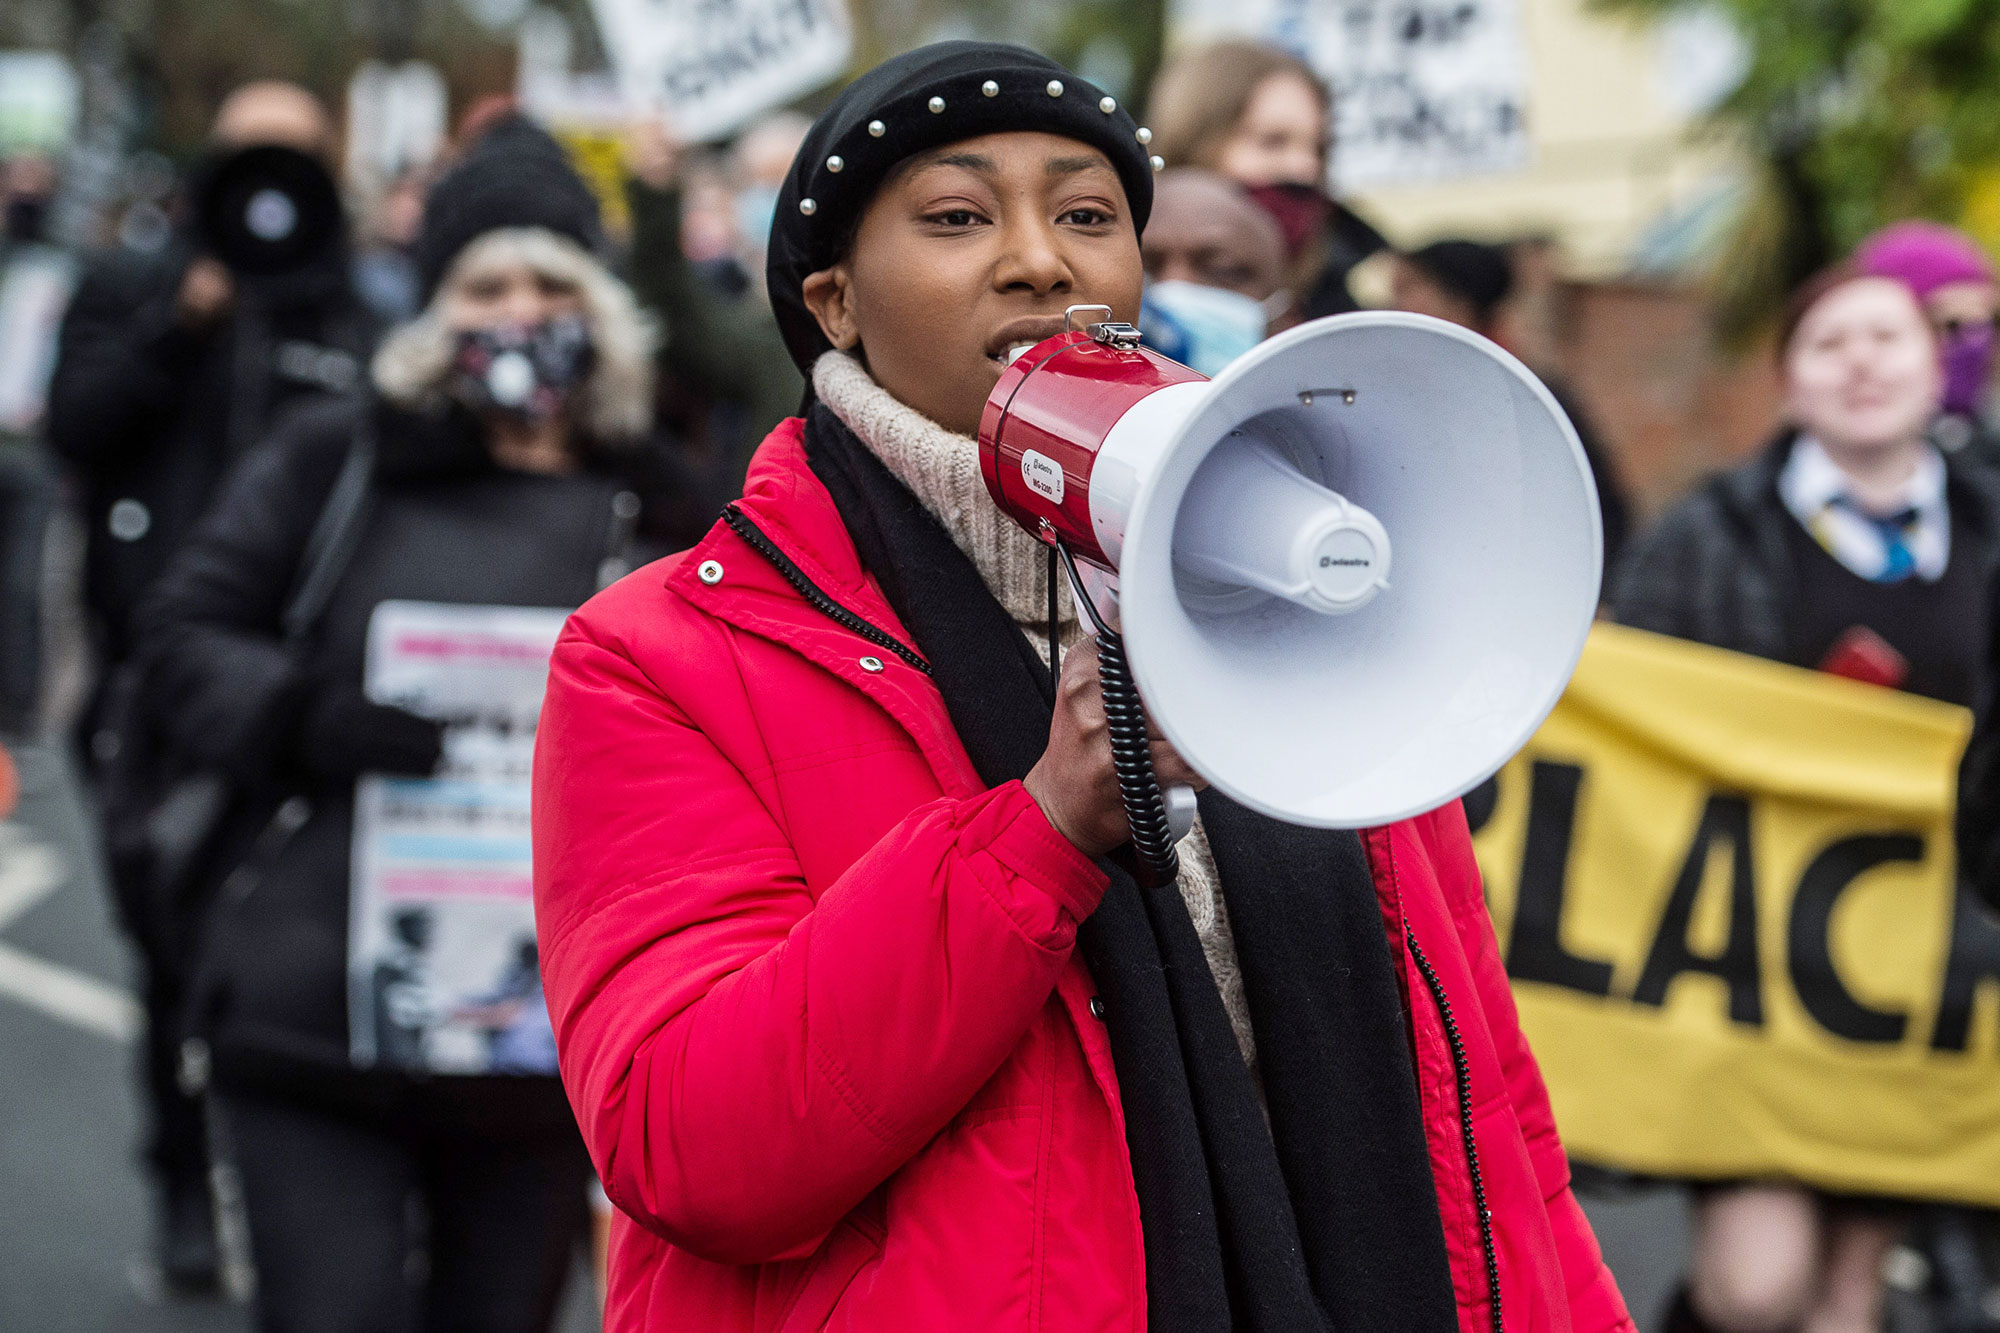  Black Lives Matter activist Sasha Johnson in critical condition after being shot in head